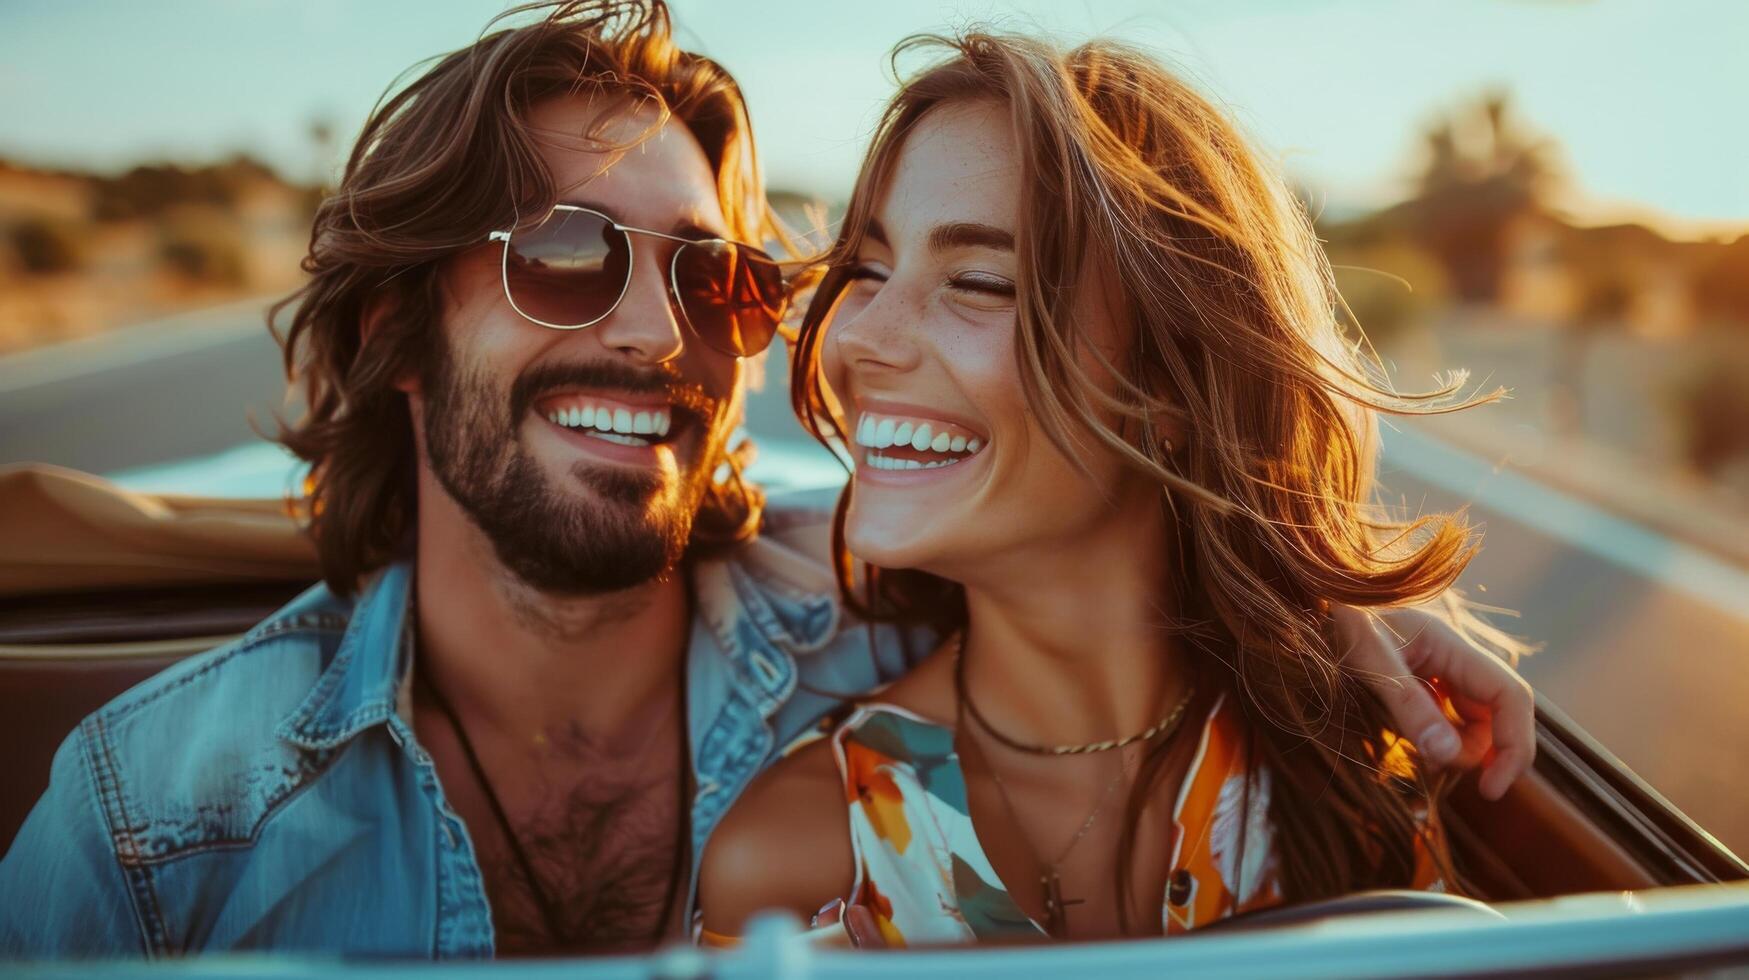 AI generated A fun and adventurous photo of a couple on a road trip, sitting in a colorful vintage car and laughing together